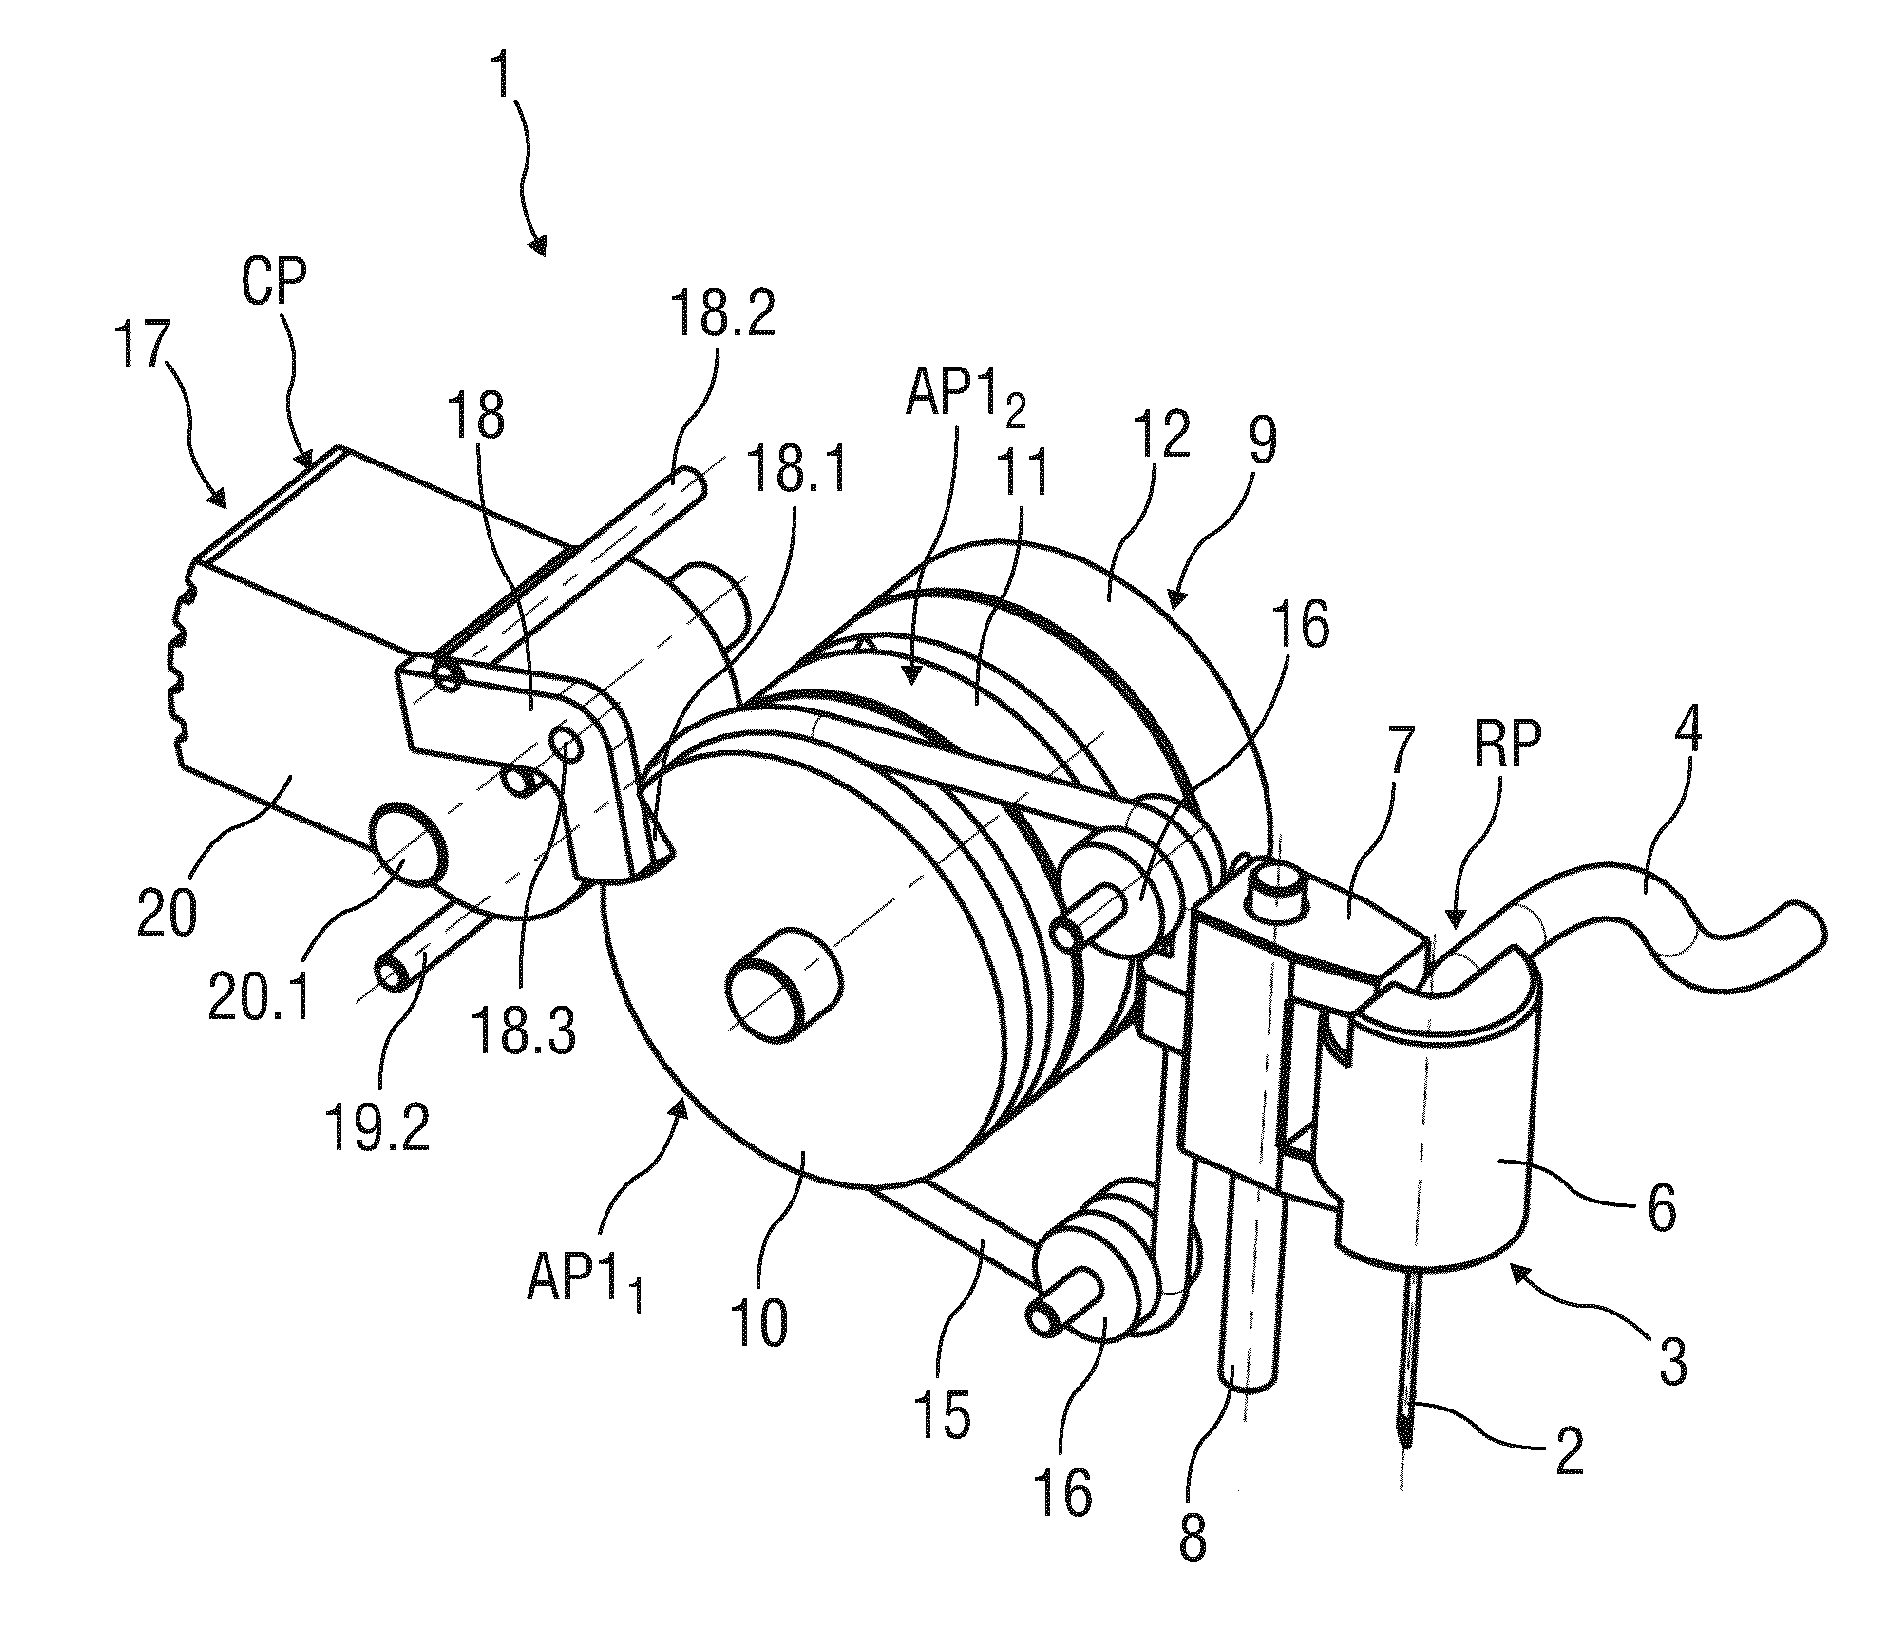 Needle insertion and retraction arrangment with manually triggered, spring-loaded drive mechanism